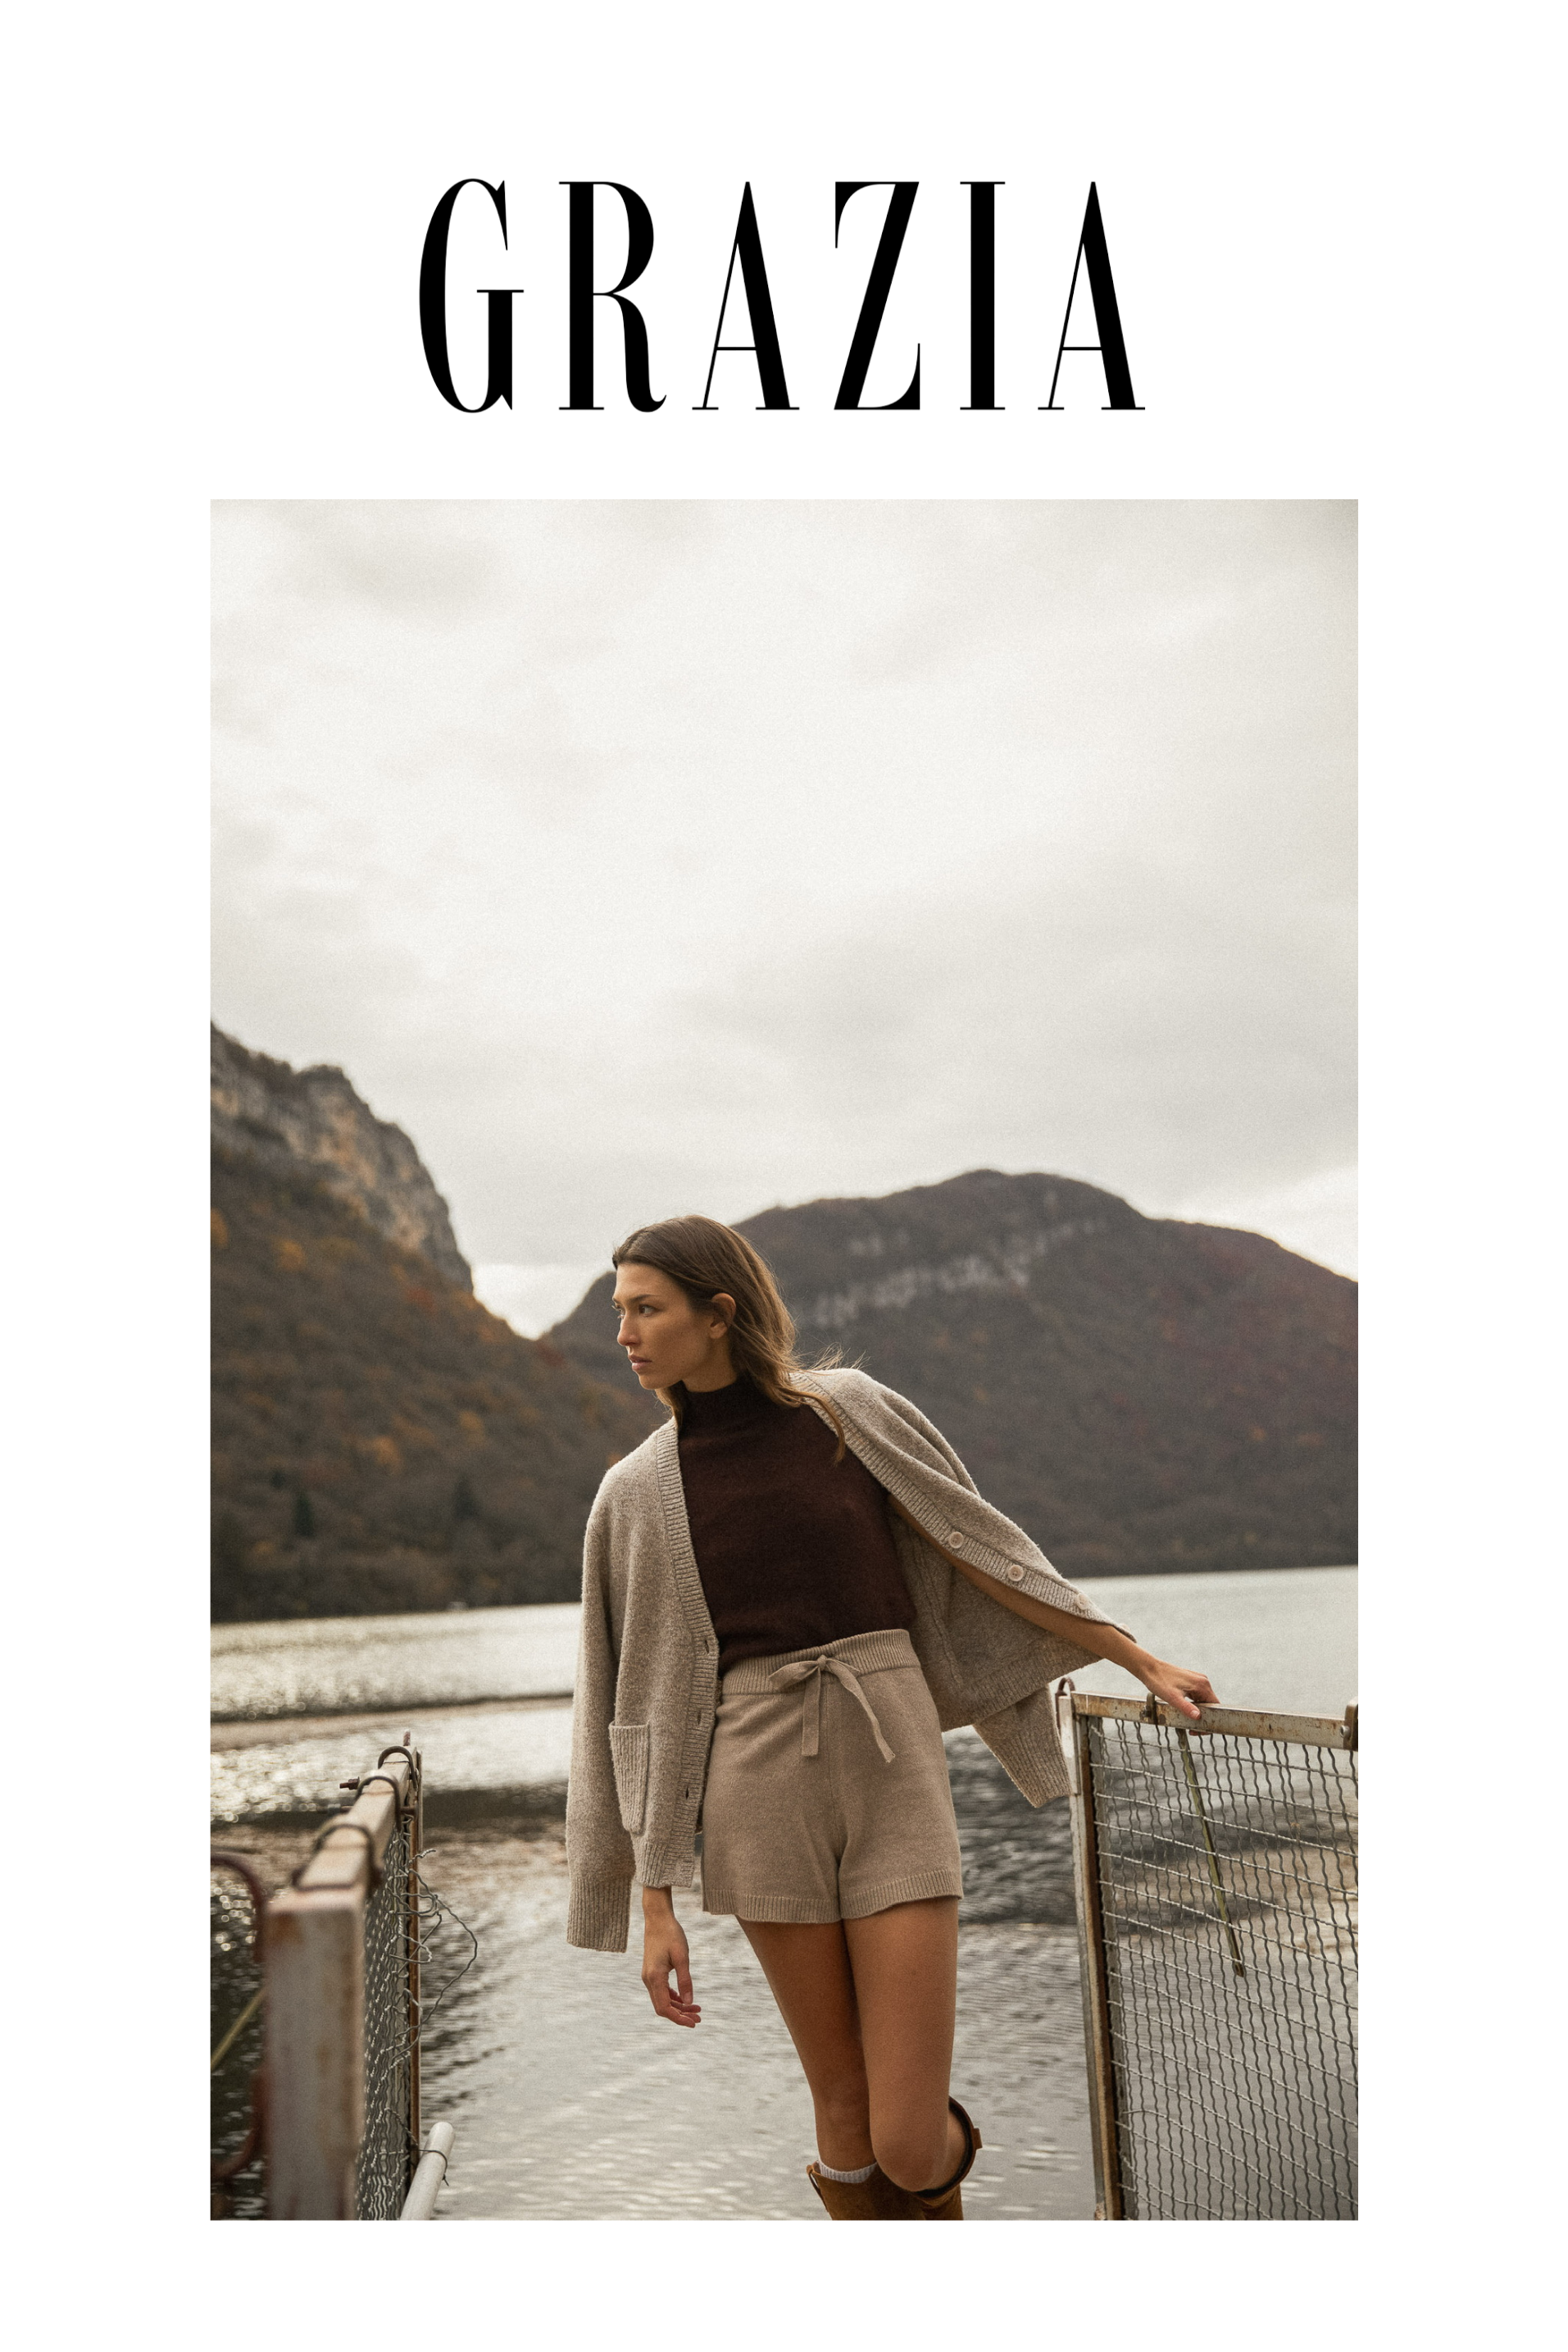 GRAZIA BULGARIA | It's not warm, it's not cold, what to wear?